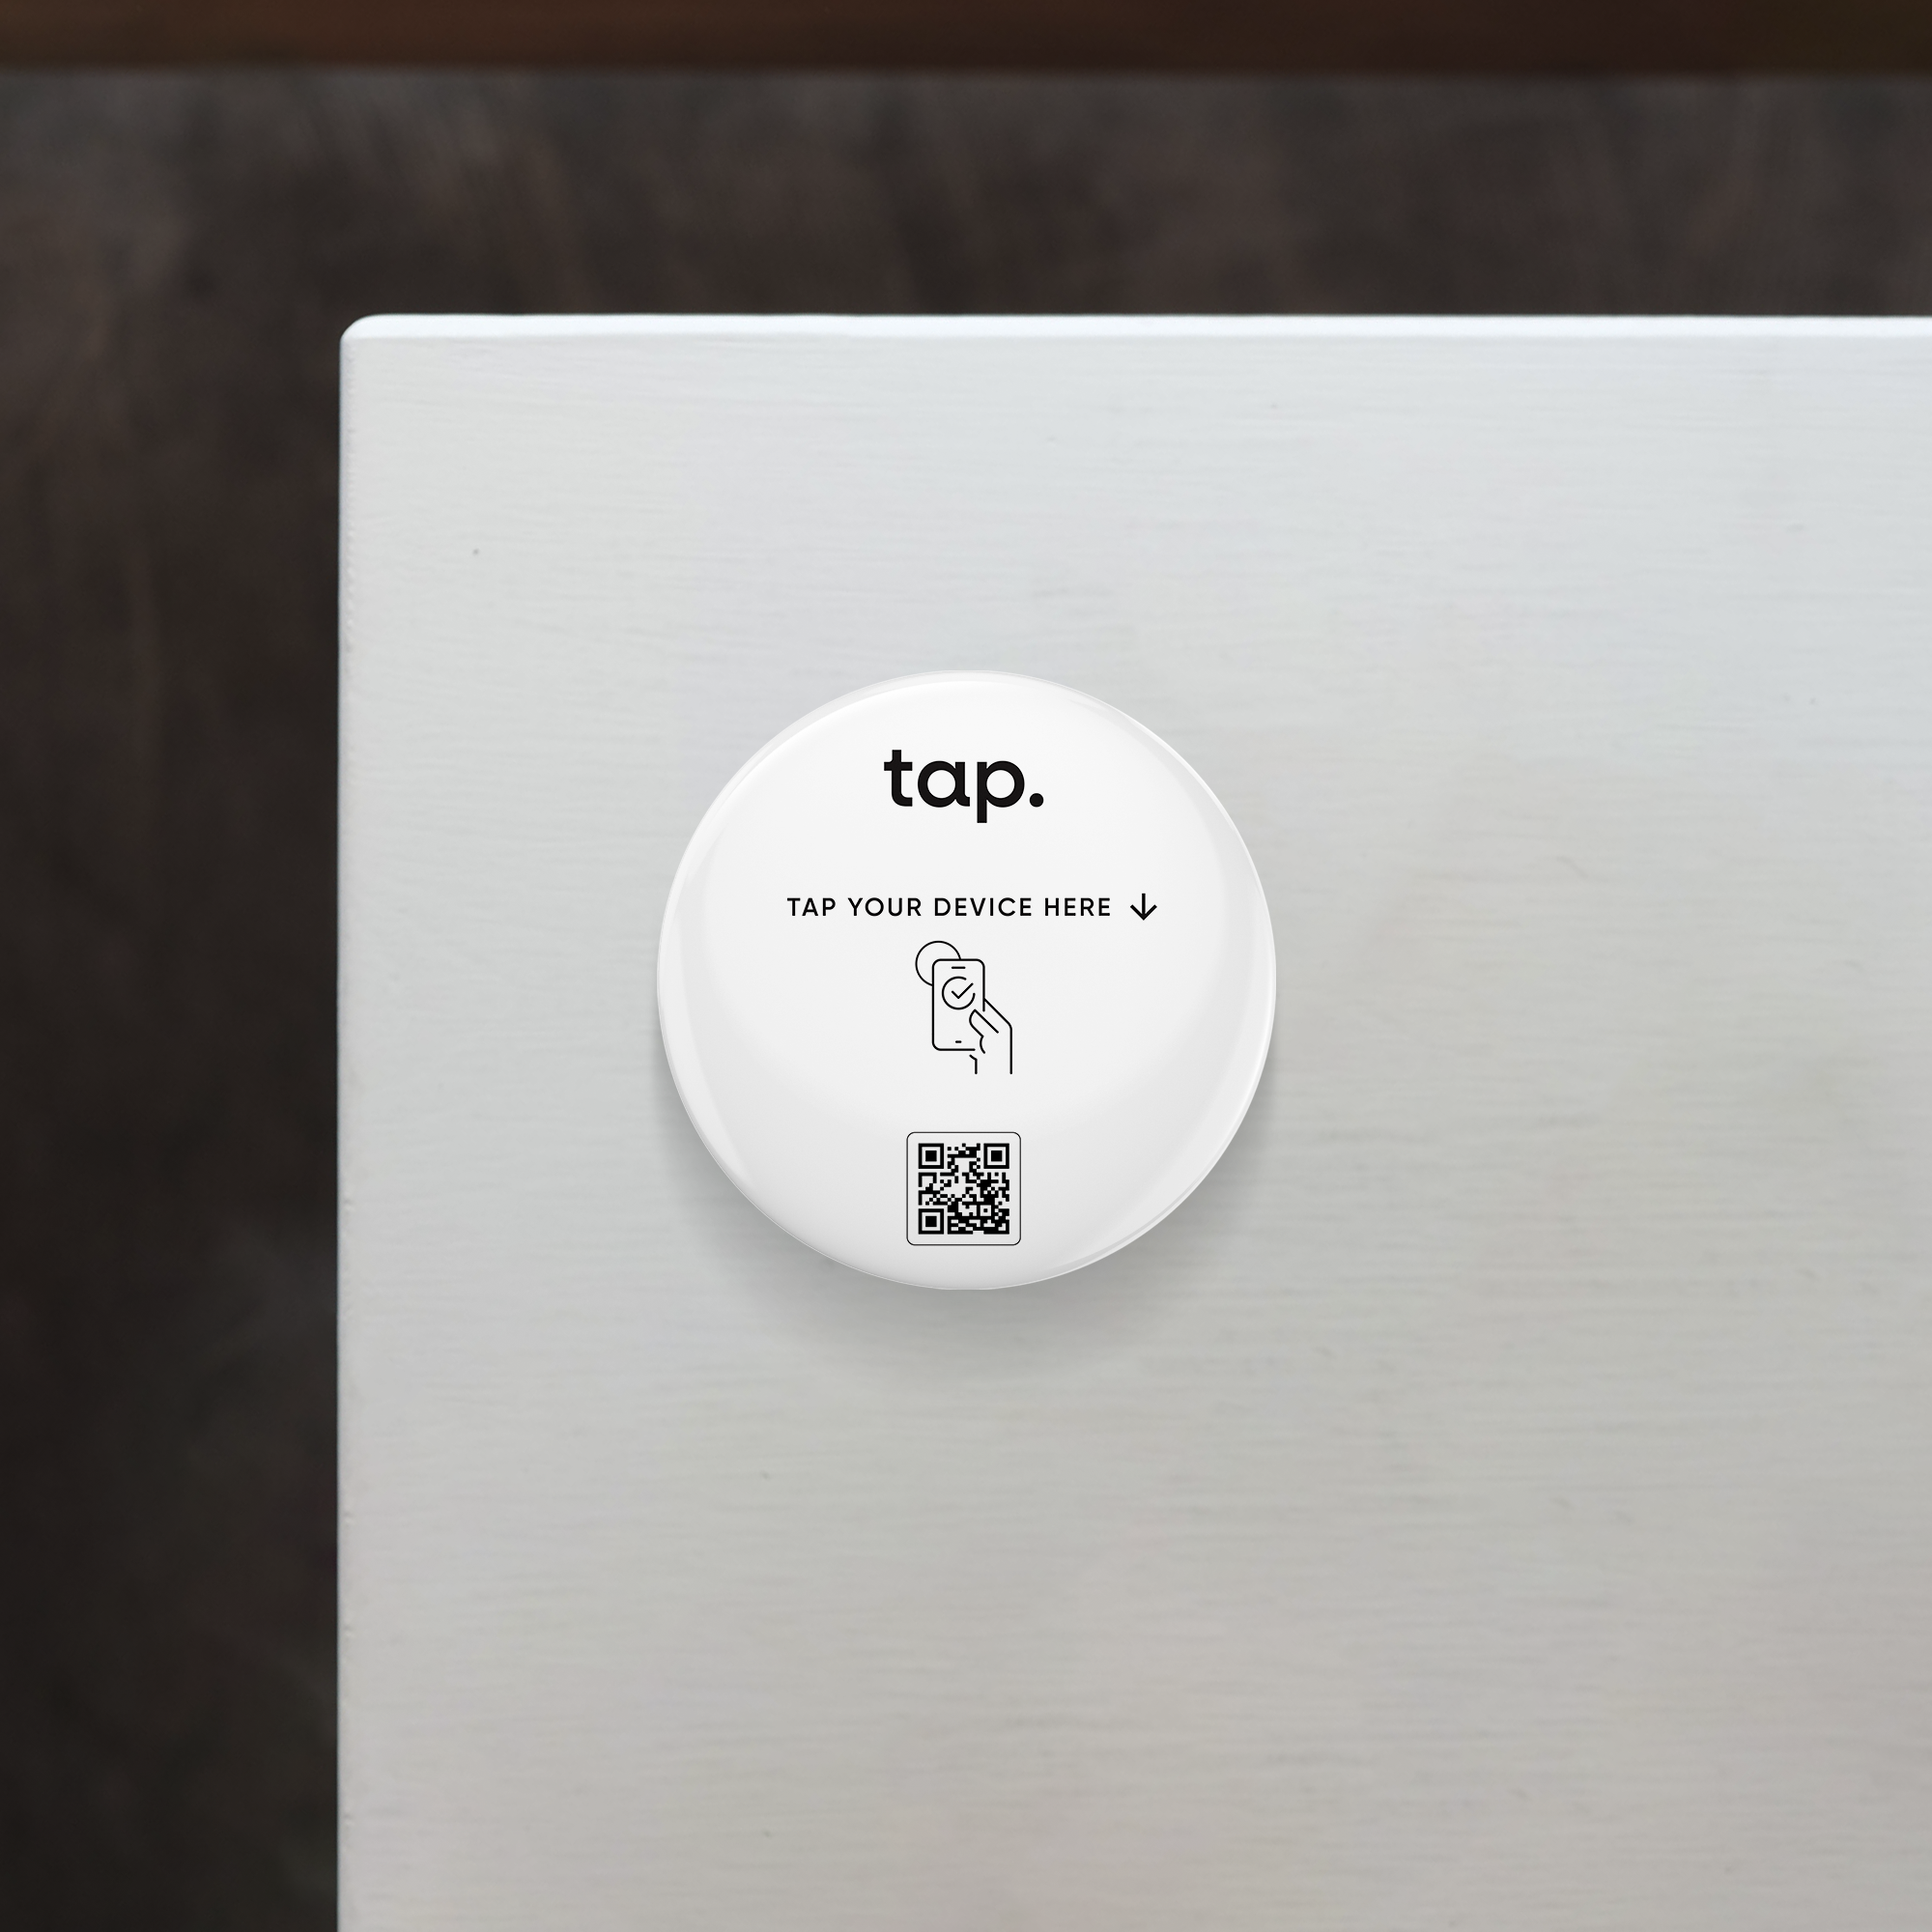 NFC tap point device with QR code for smartphone interaction on a white table surface.